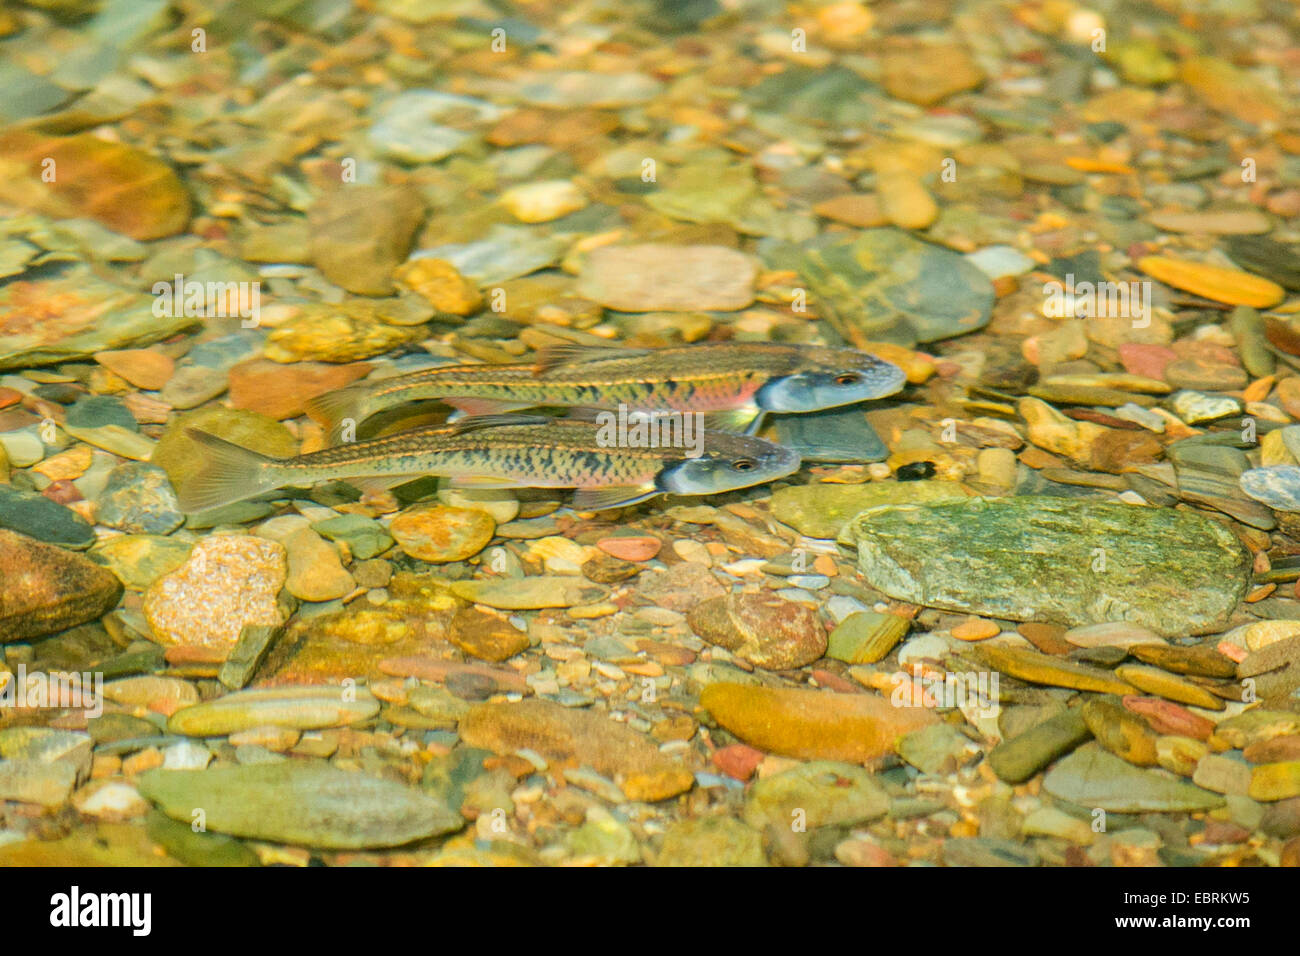 Tennessee striped shiner (Luxilus chrysocephalus), couple with spawning coloration and cloudy secrete on the head with white nodules, USA, Tennessee, Little River Stock Photo